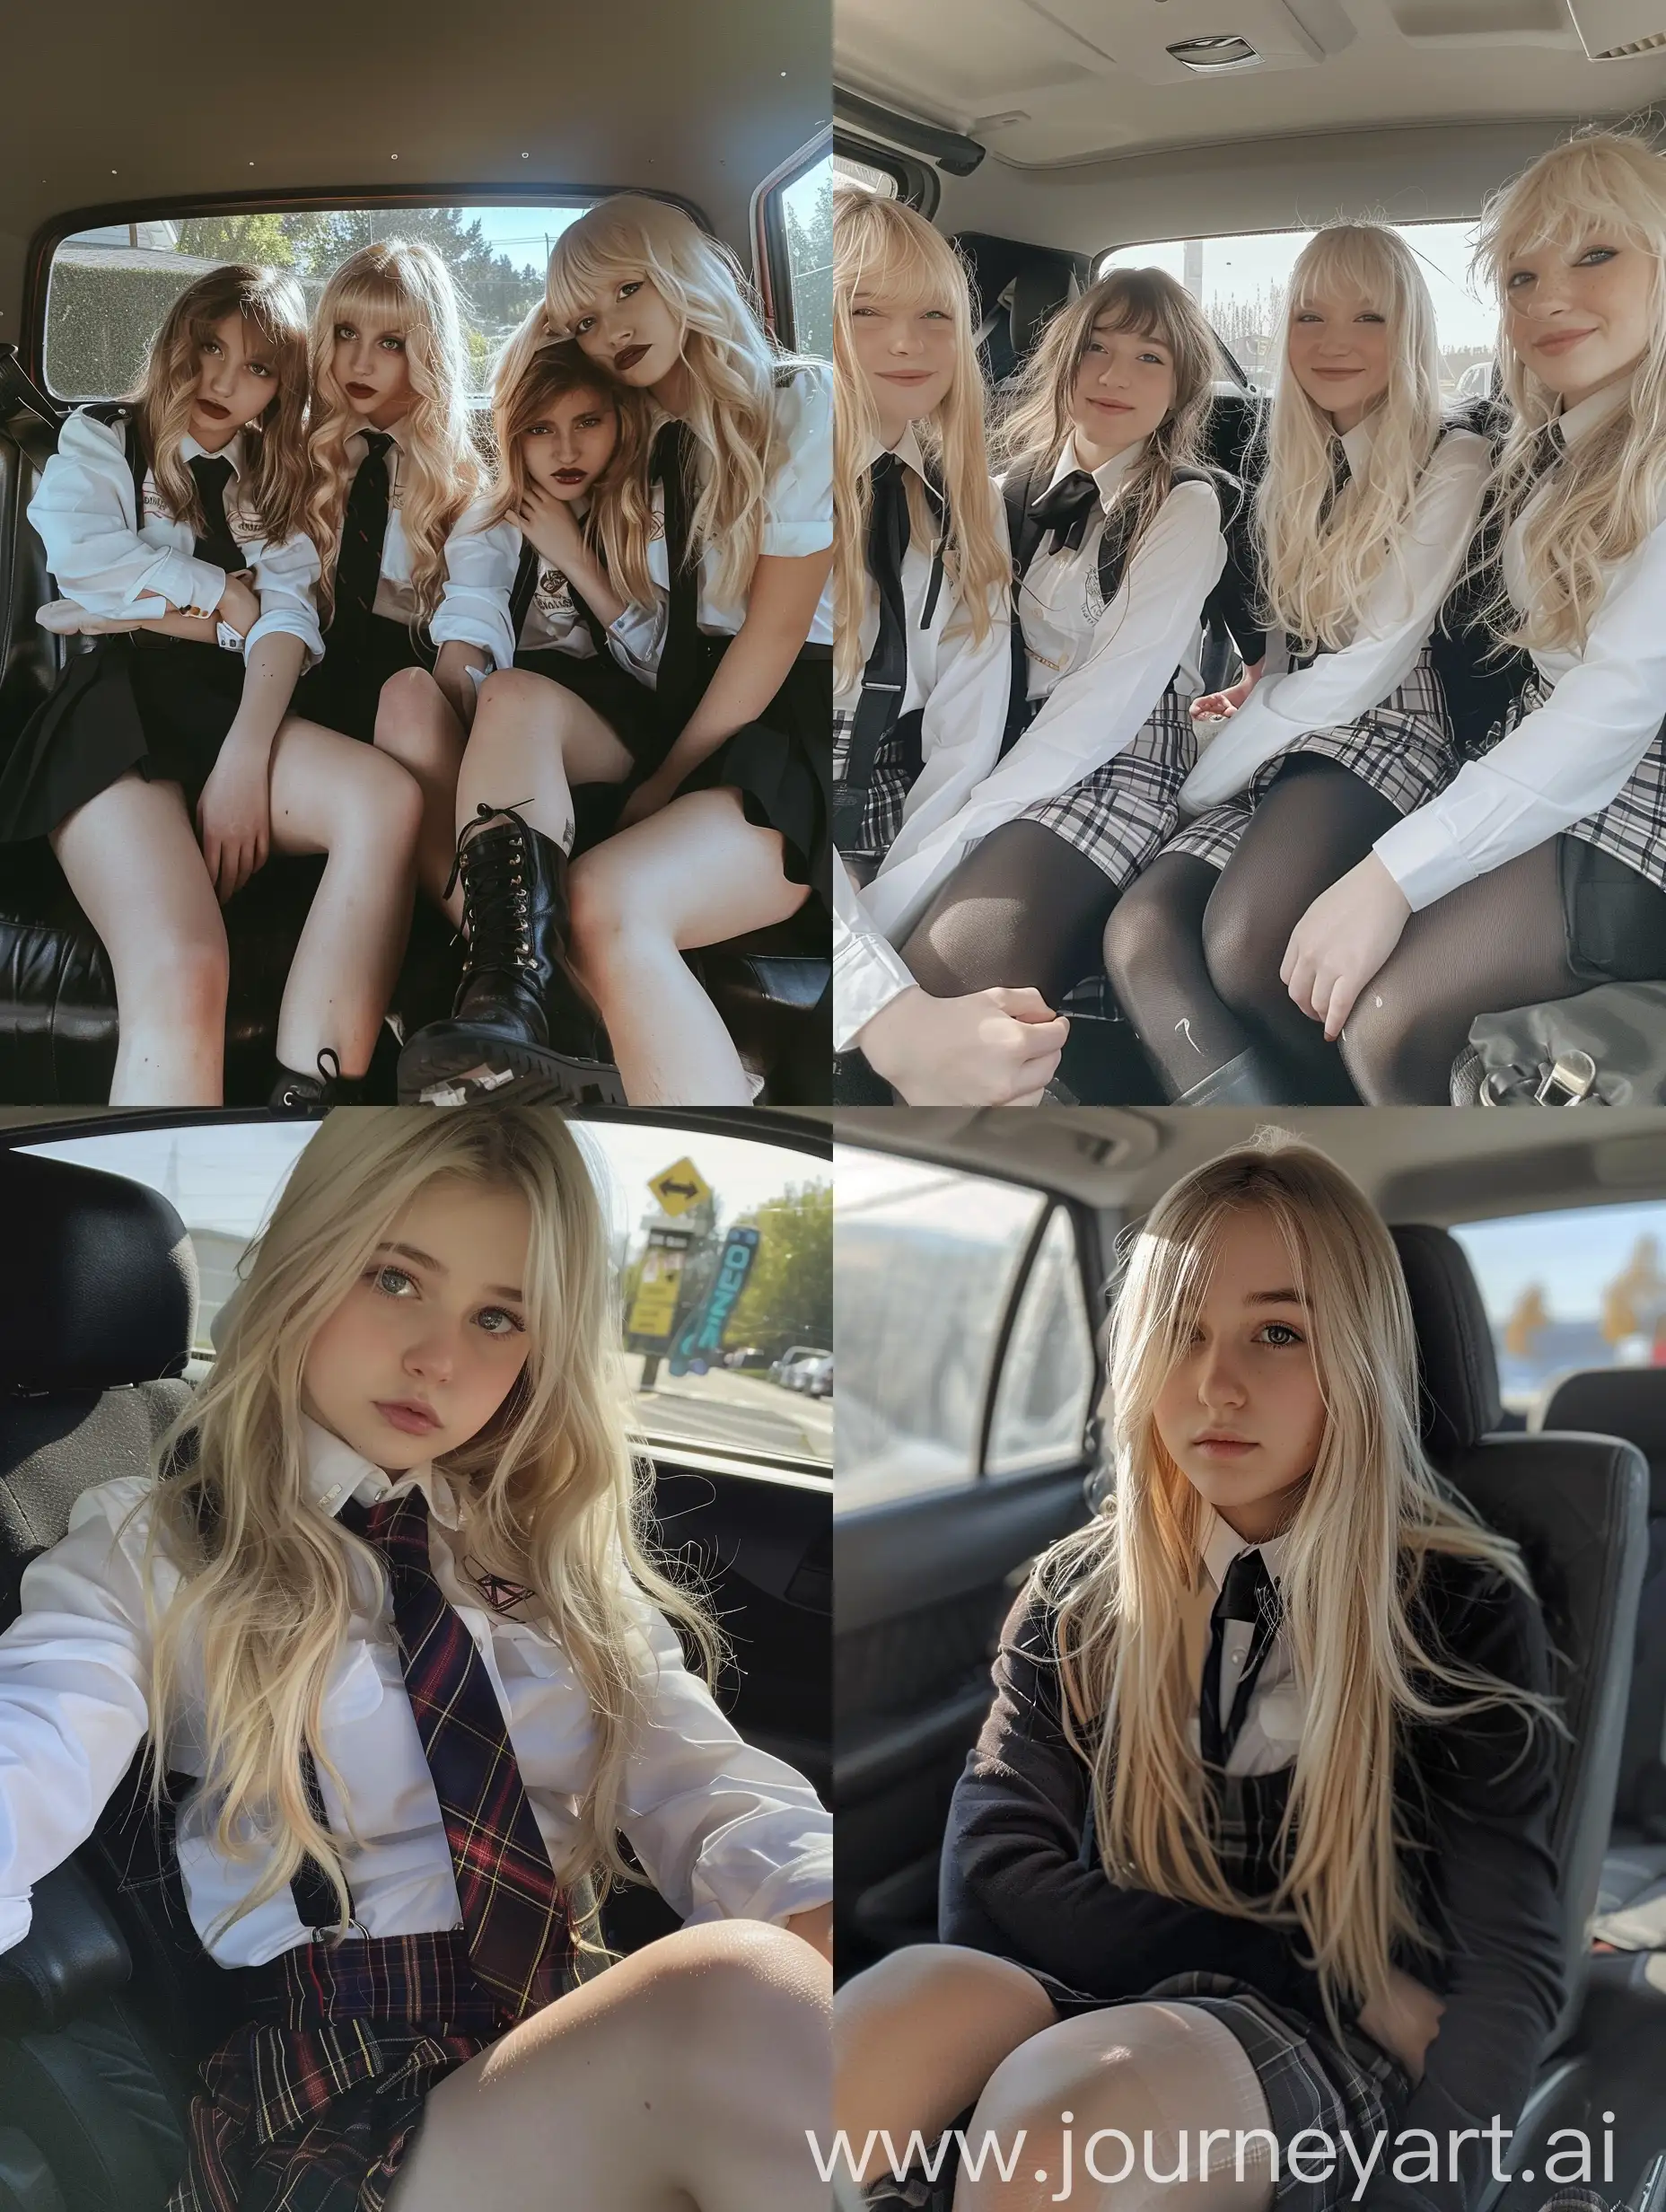 Four-Girls-in-School-Uniforms-with-Blonde-Hair-Inside-Car